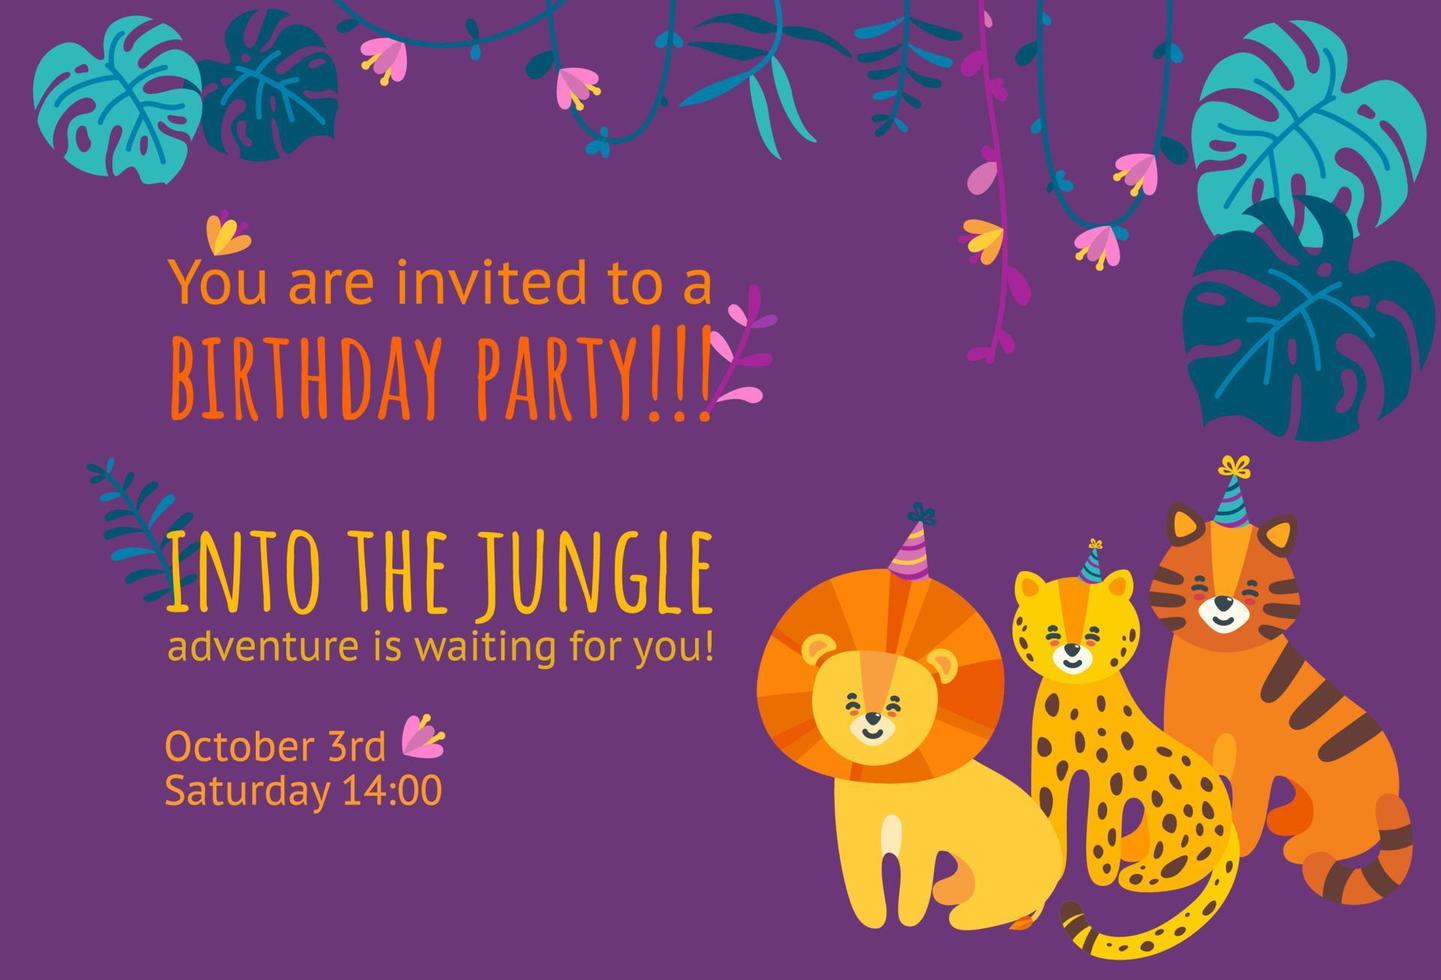 Birthday invitation card with tiger, leopard and lion. Ready-made invitation design for birthday parties. Falt vector illustration with jungle leaves and lianas.